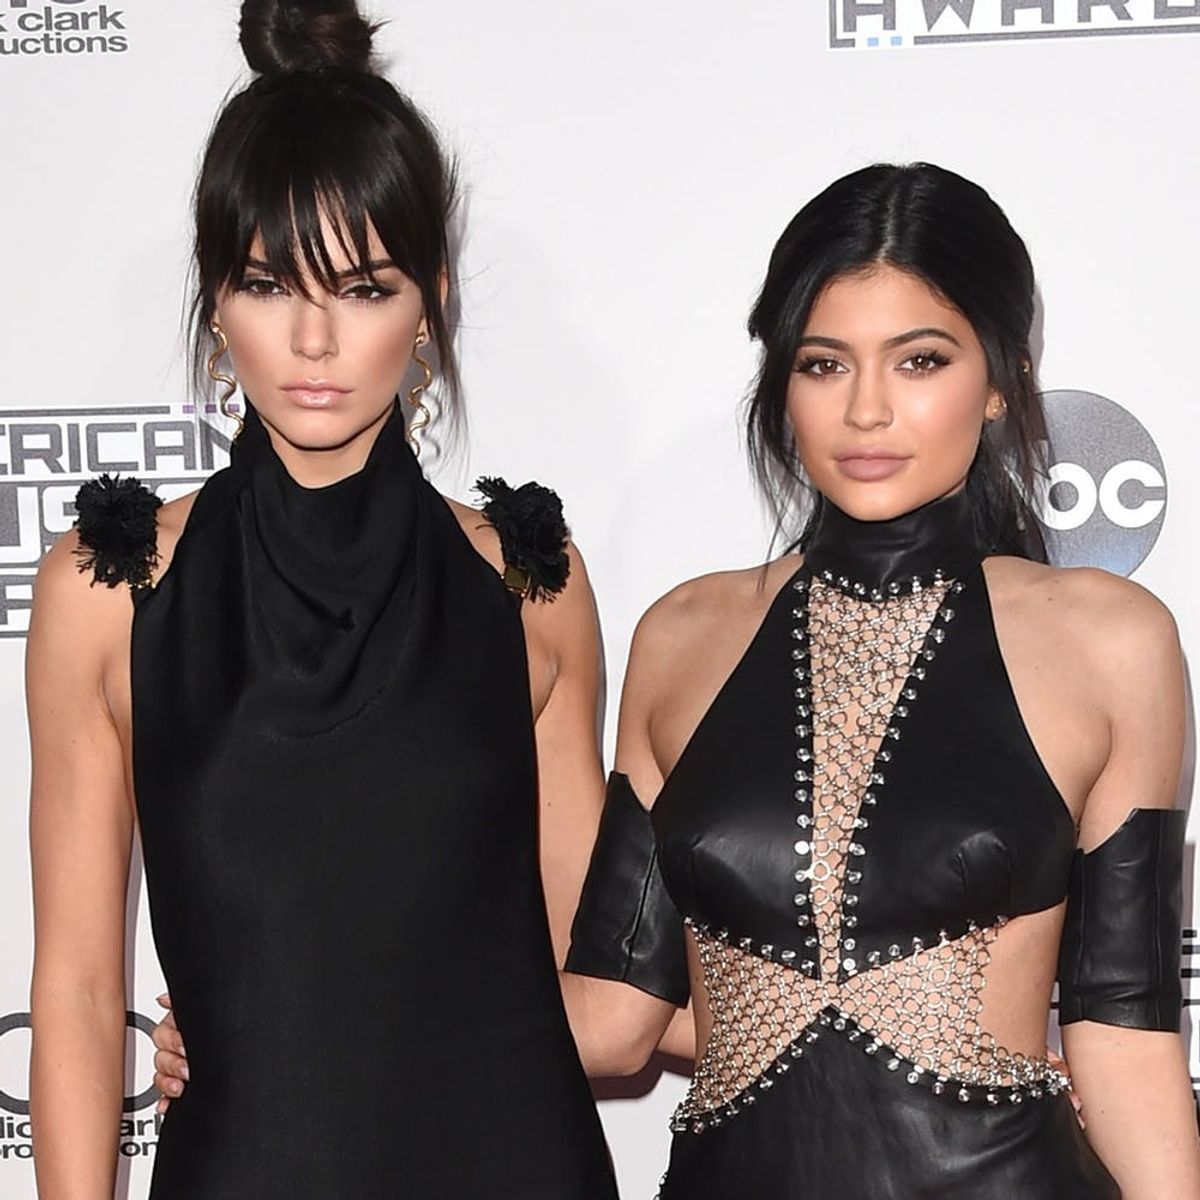 Kendall and Kylie Have a Secret Sister Handshake and Now We Want One Too